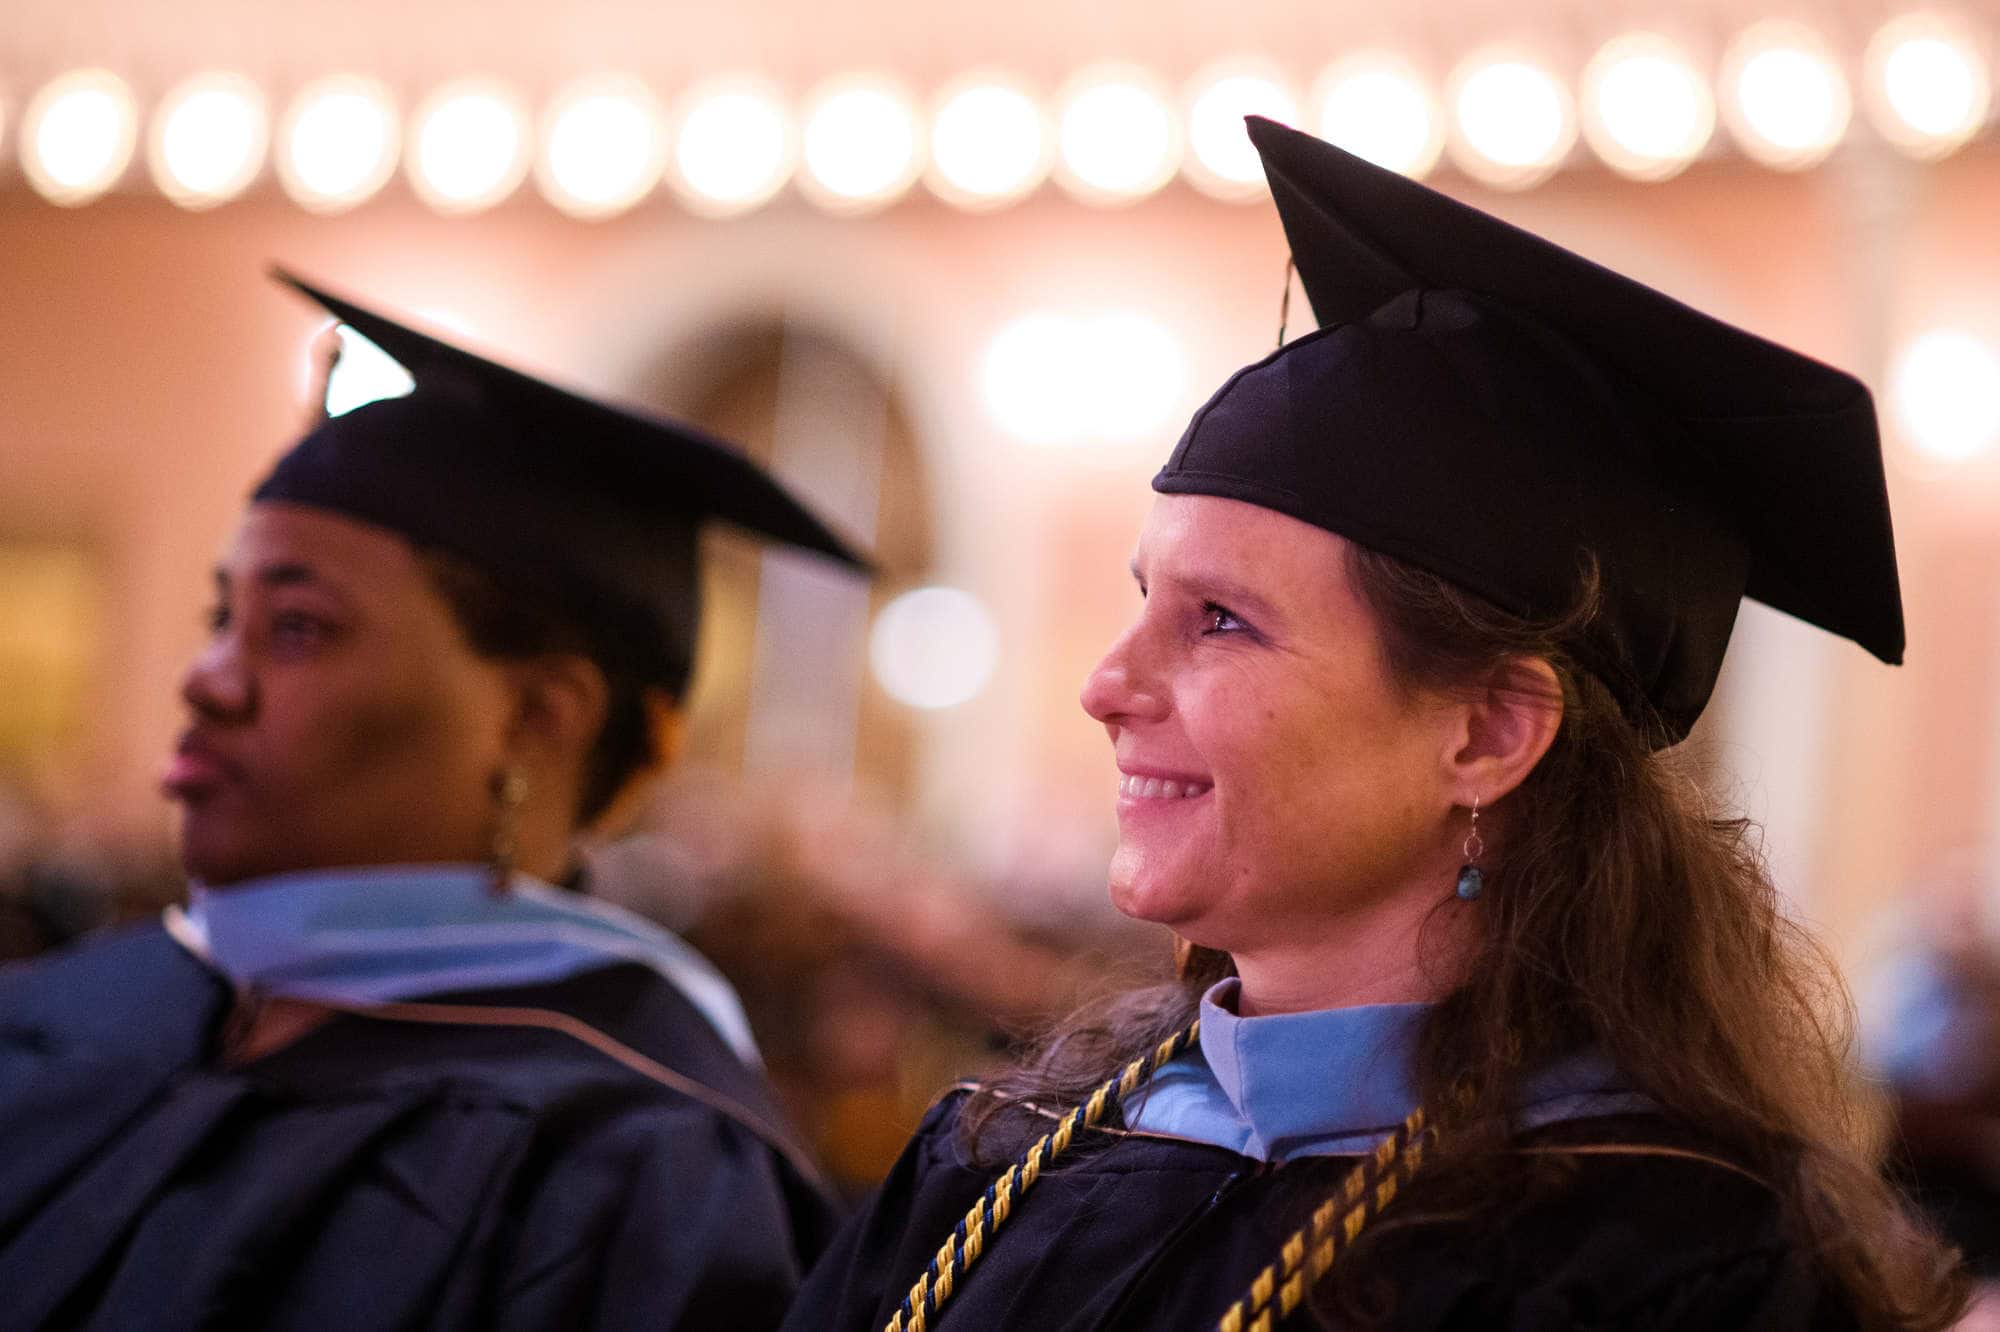 Candidates for the Educational Specialist degree smile as their degree is conferred during the Brenau University Graduate Commencement ceremony